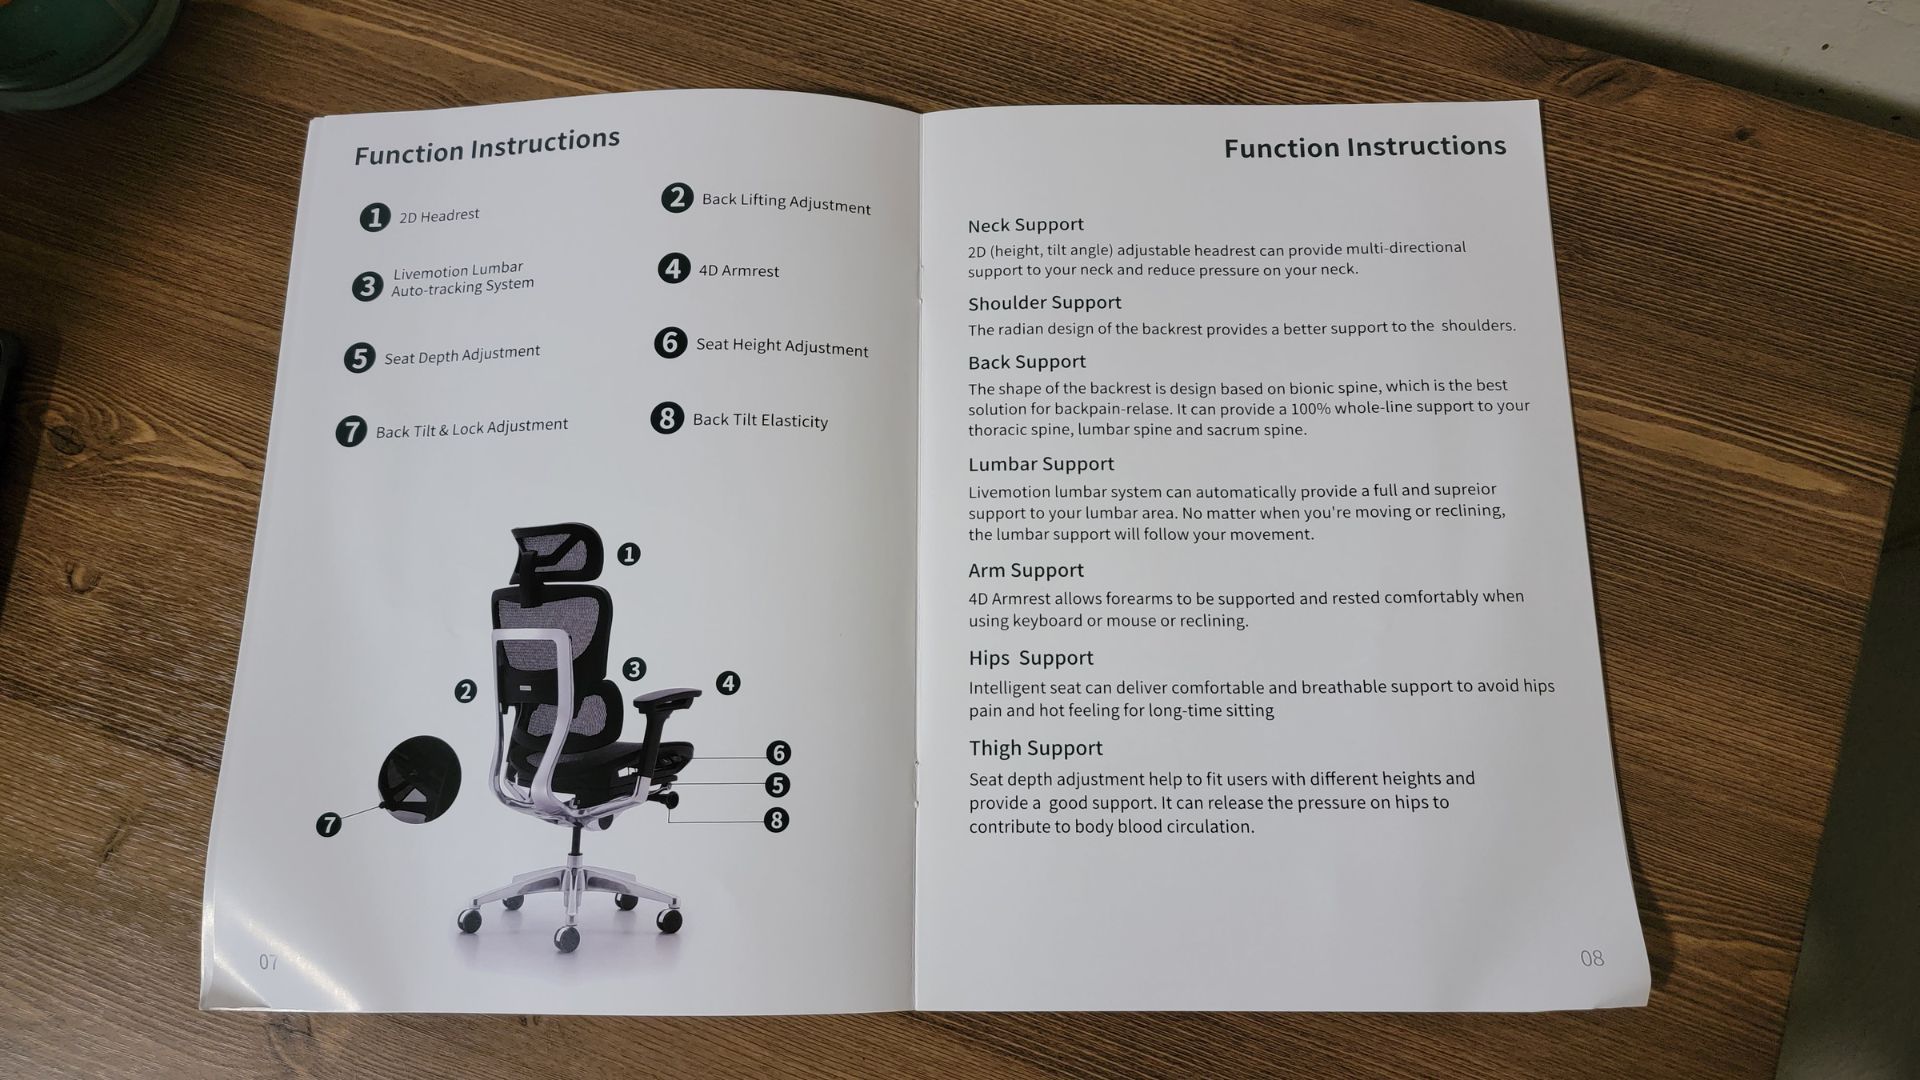 OdinLake Ergo Plus 743 ergonomic chair manual adujstablilty and supports info pages